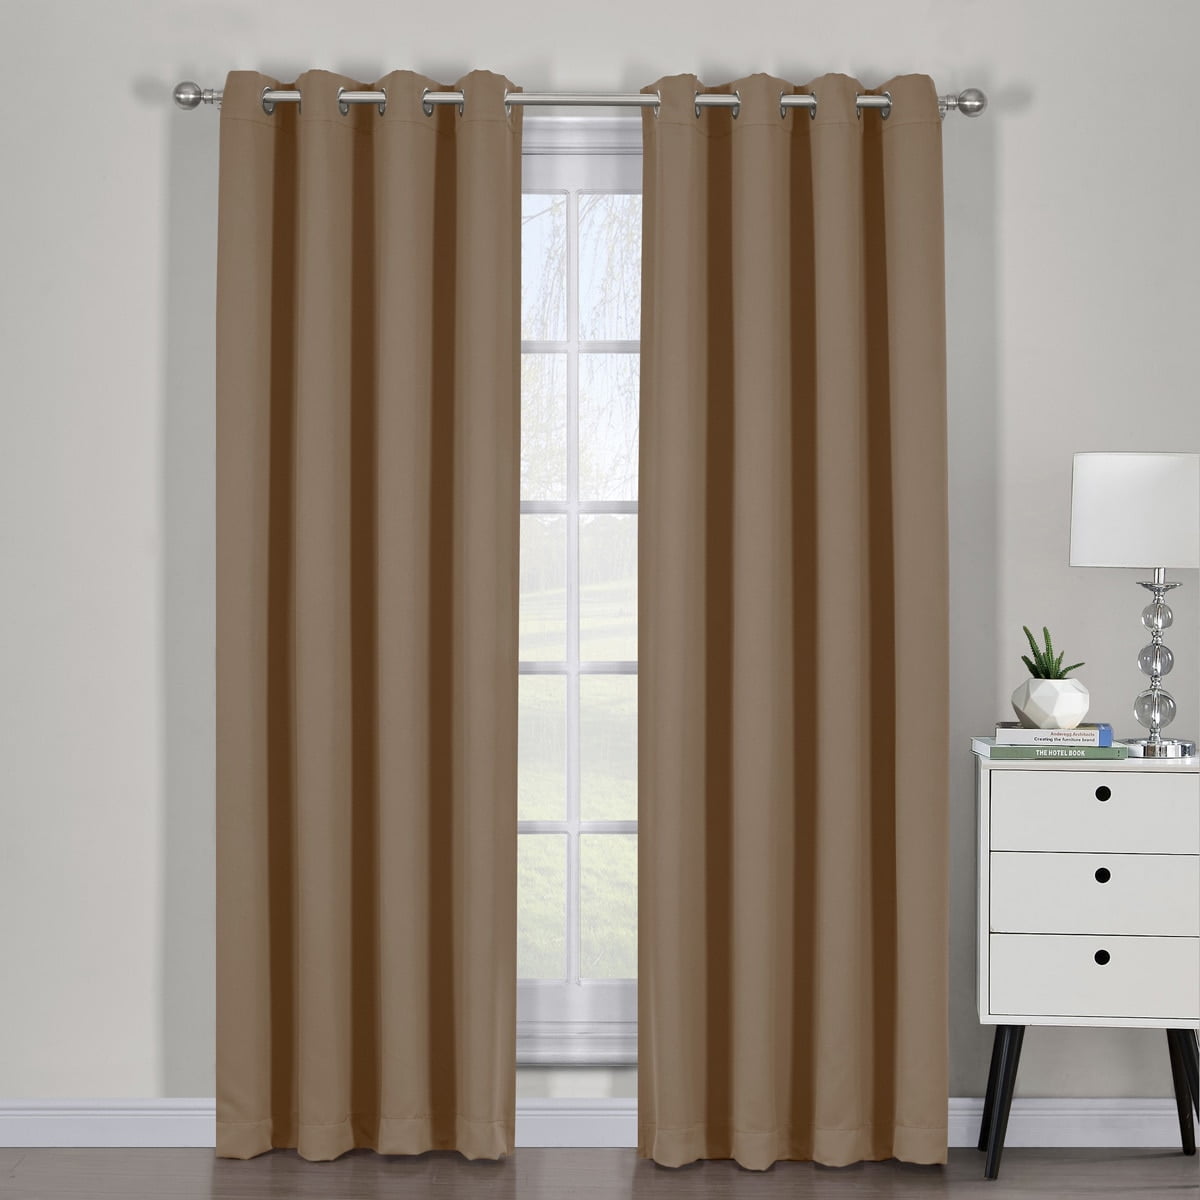 Set Of 2 Ava Blackout Weave Curtain Panels With Tie Backs Pair